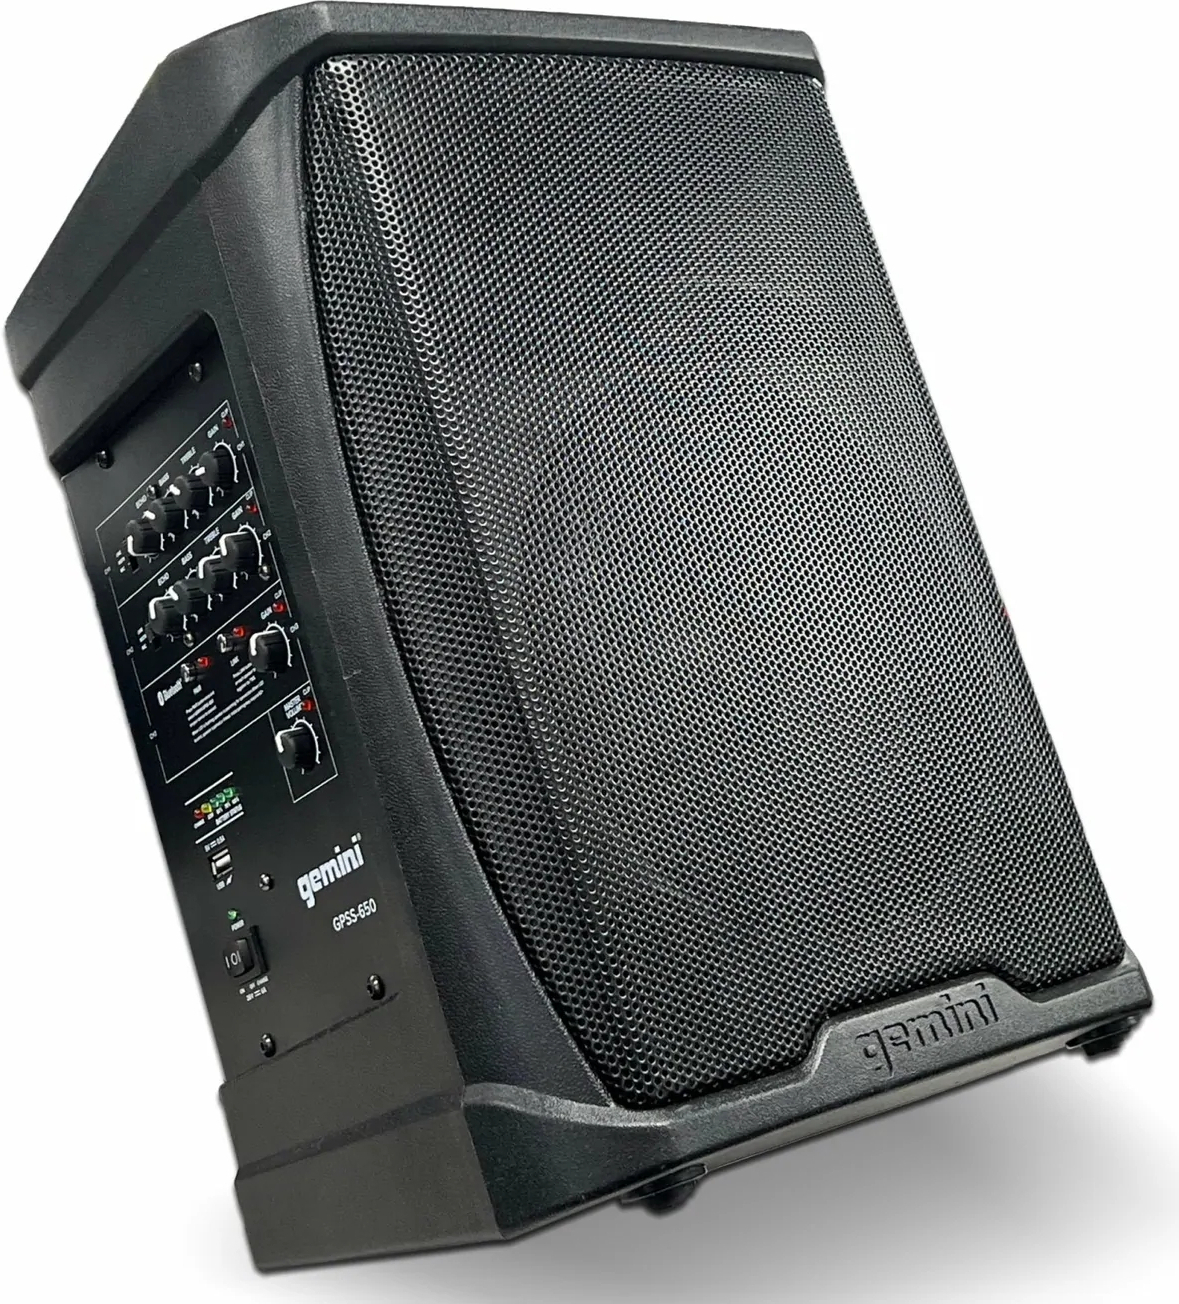 Gemini Gpss-650 - Portable PA system - Main picture